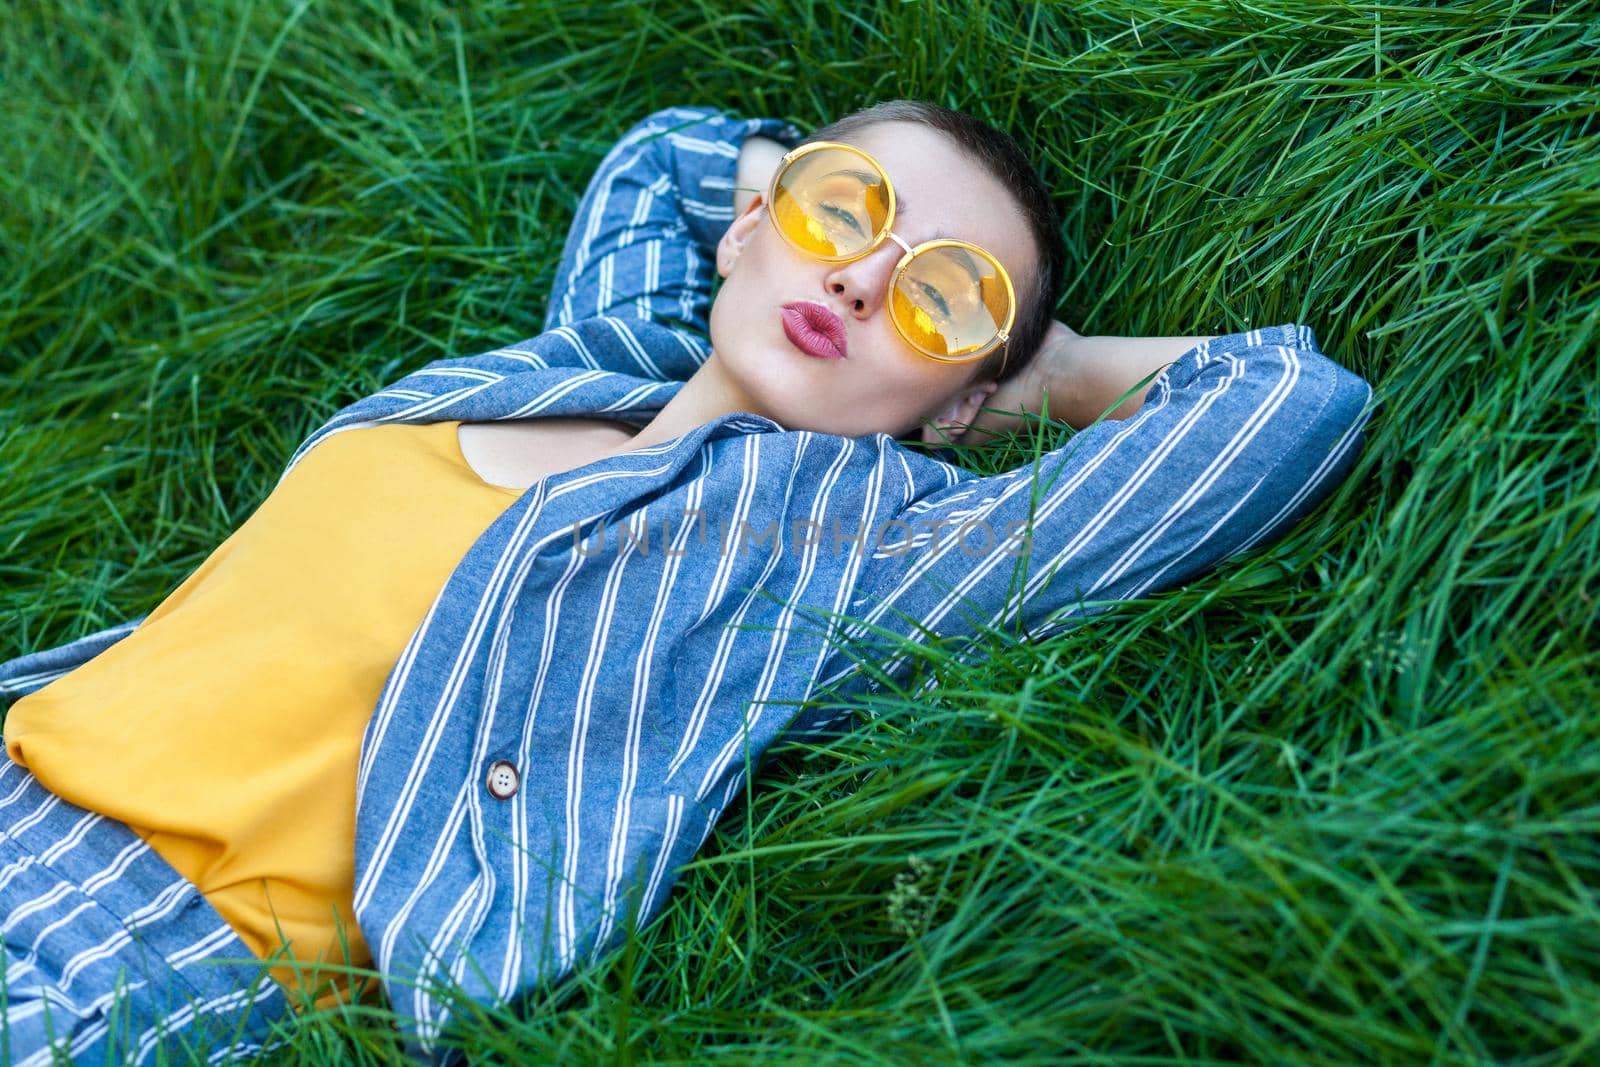 Portrait of cute young girl with short hair in casual blue striped suit, yellow shirt, glasses lying down on green grass, resting, holding hand behind head, looking at camera, kissing. summertime shot